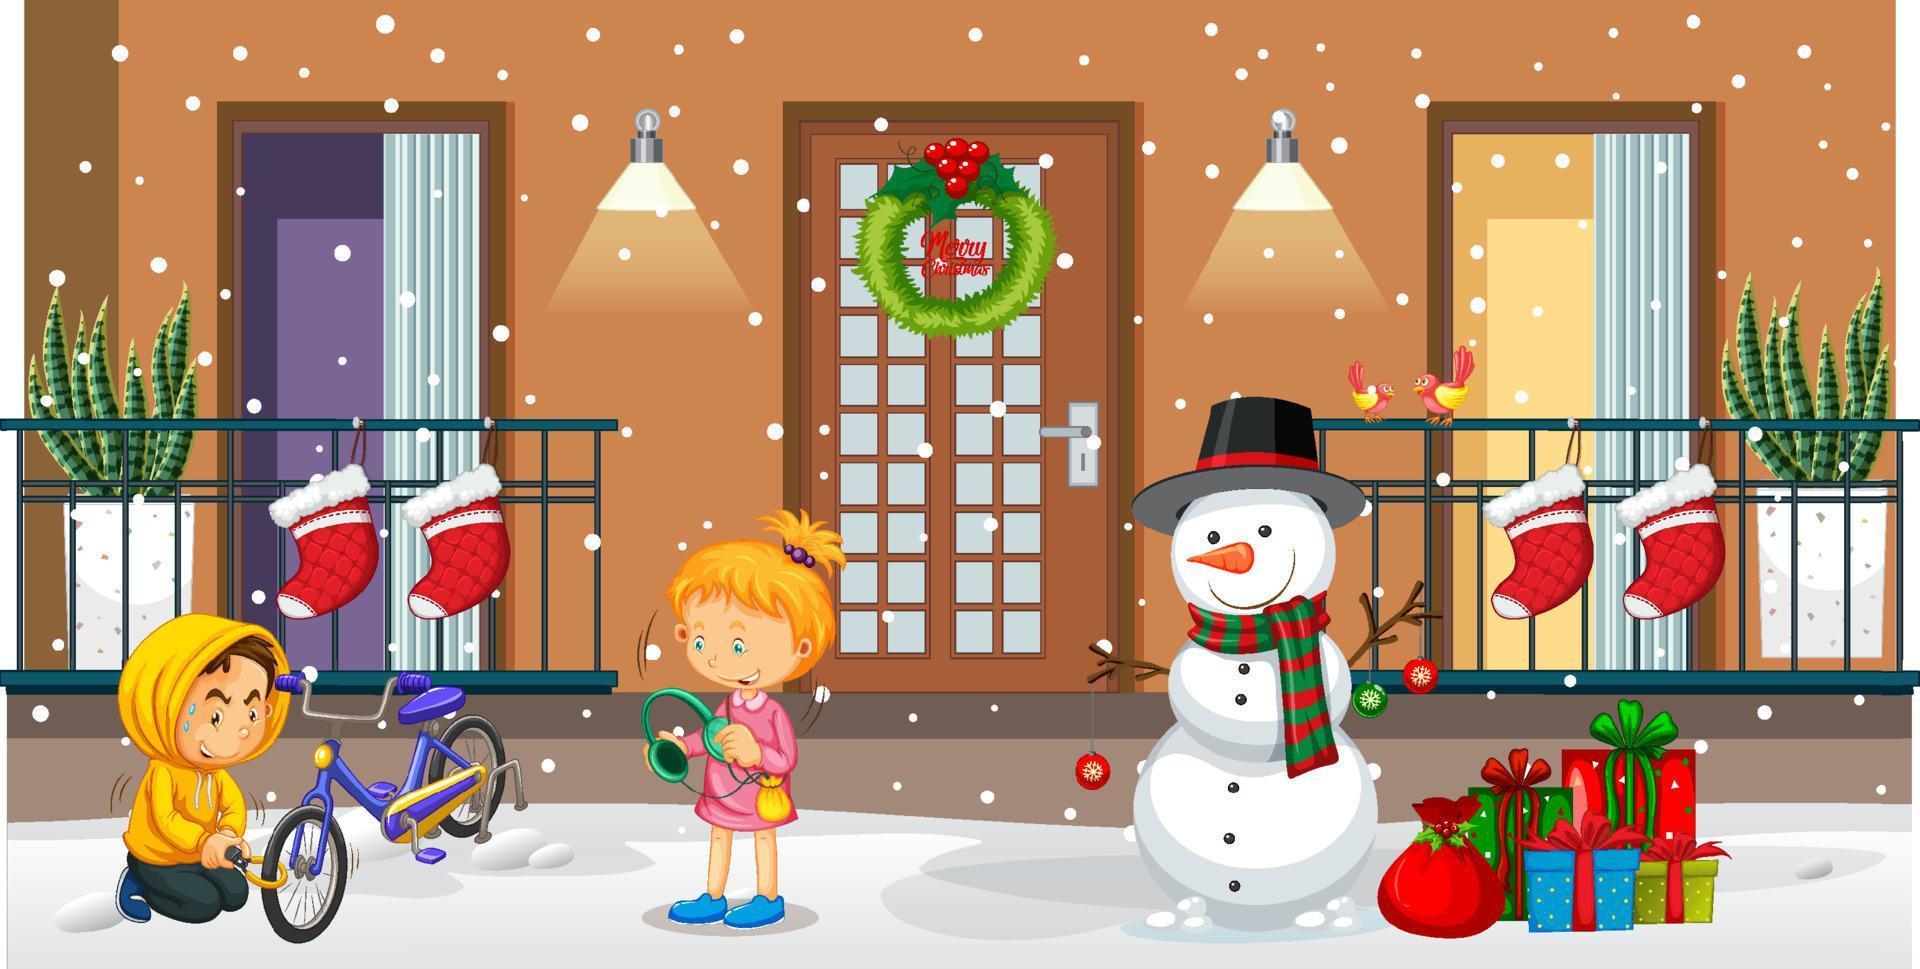 Outdoor scene with people and snowman in Christmas theme vector